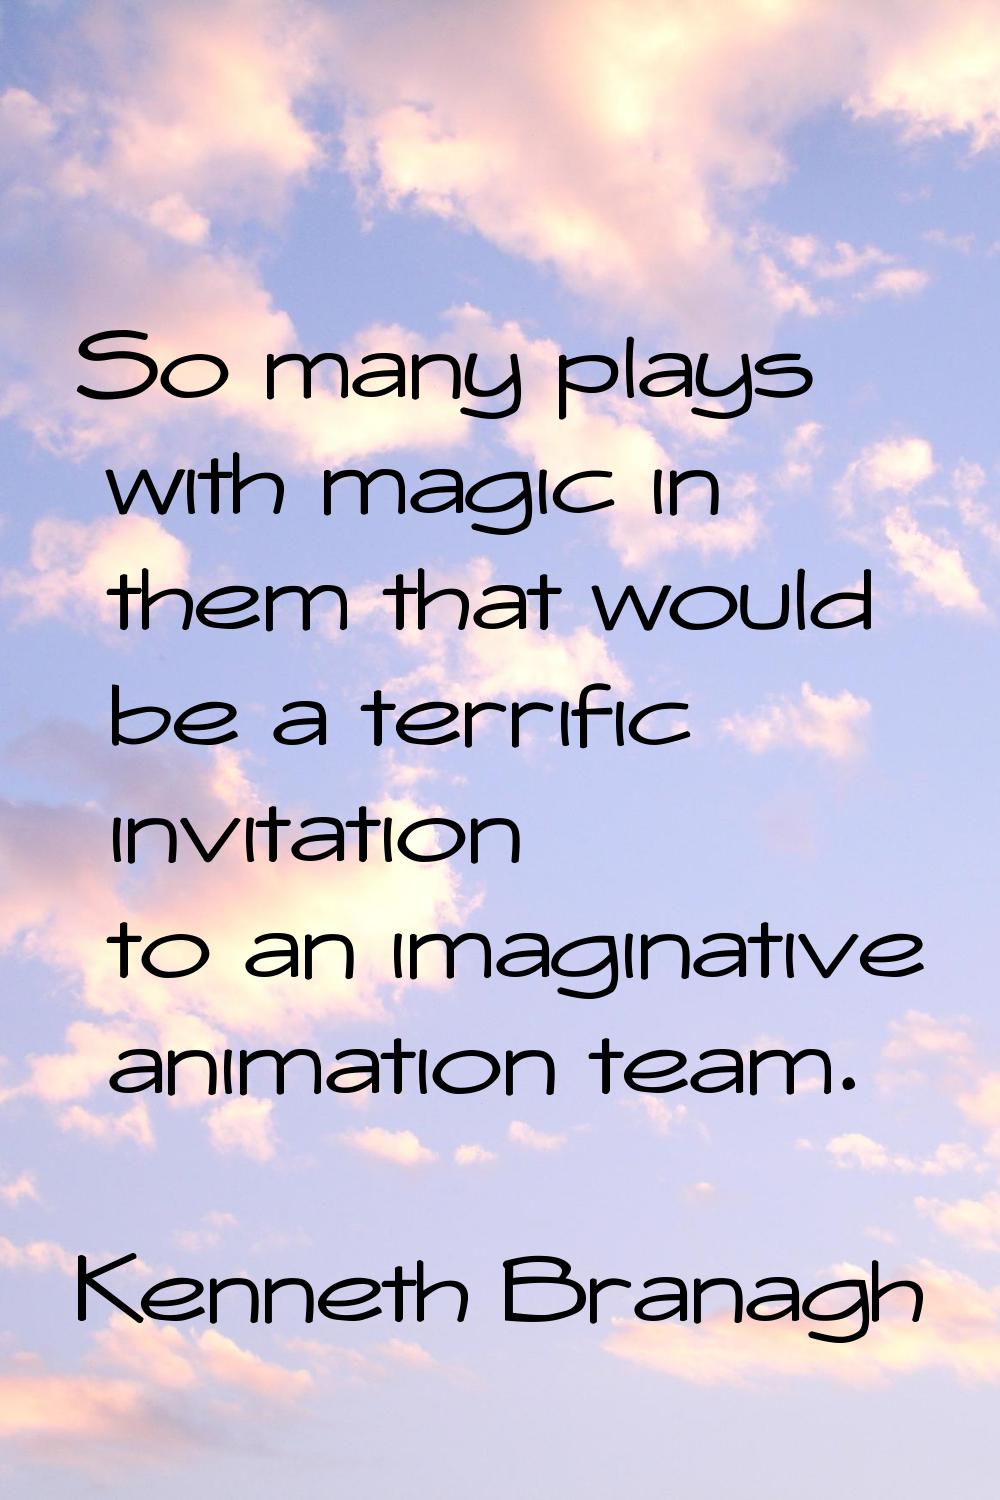 So many plays with magic in them that would be a terrific invitation to an imaginative animation te